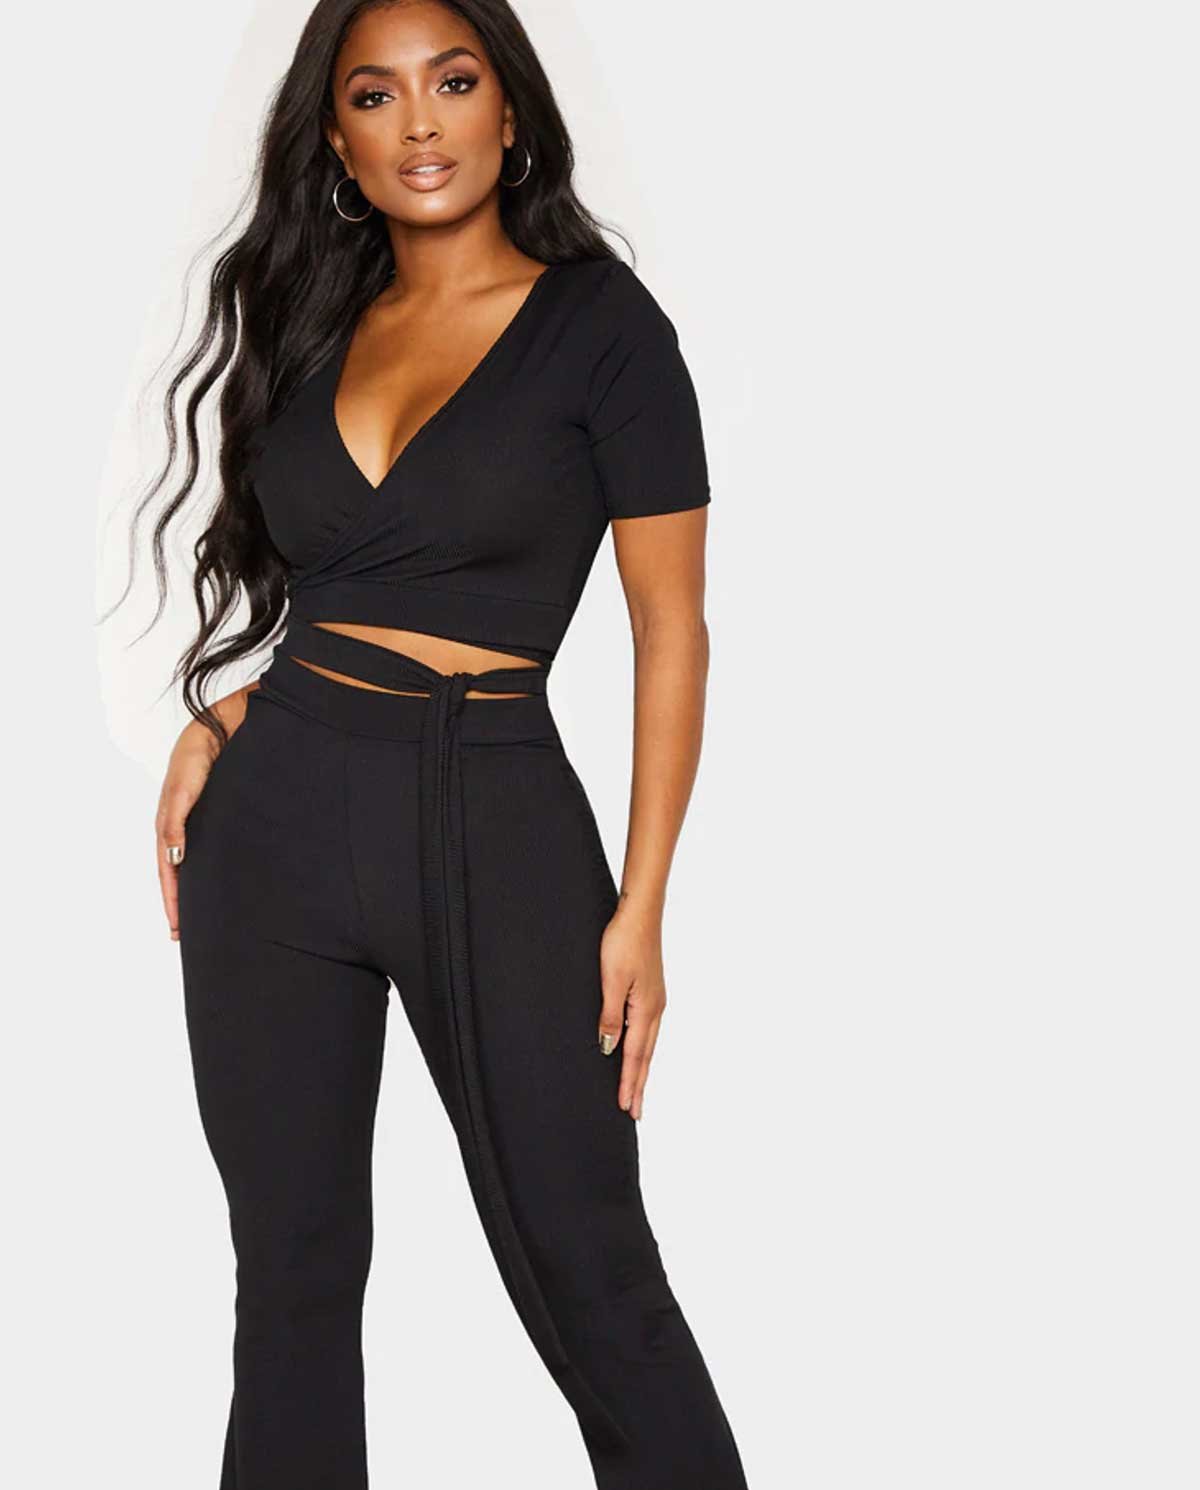 Formal pant with flares at the end and a basic top